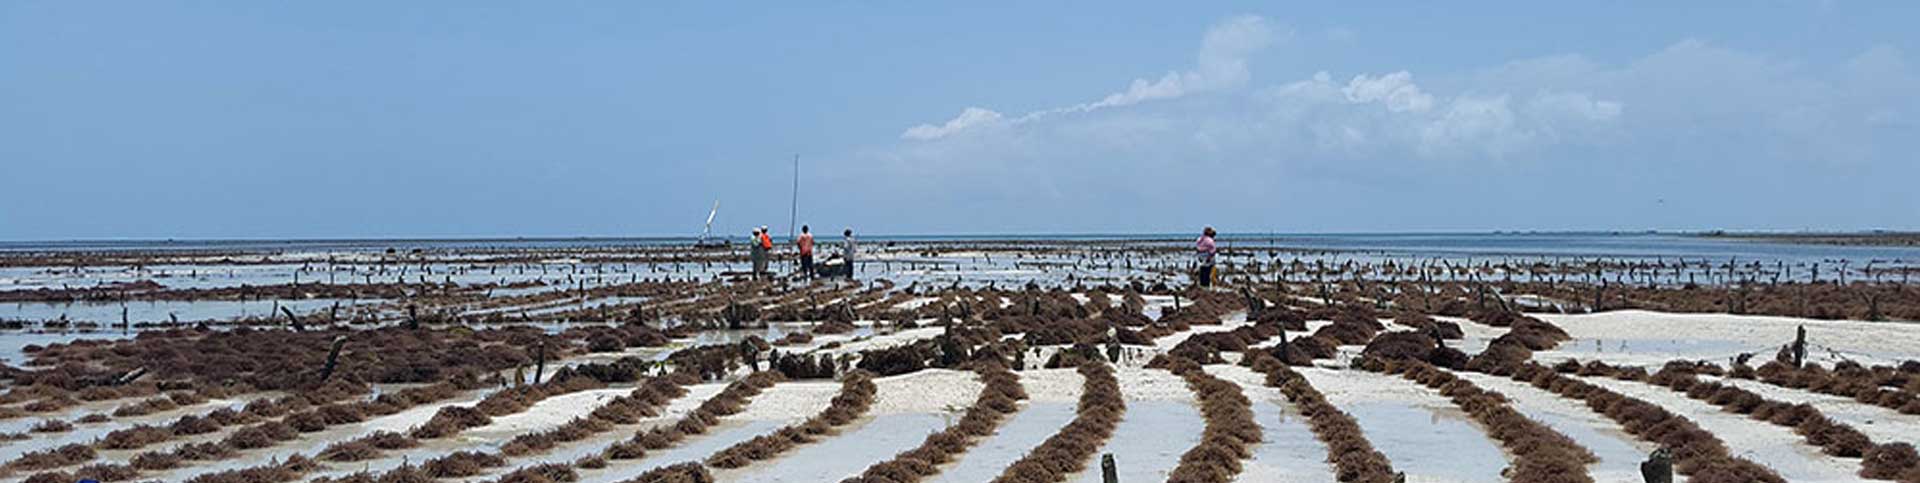 Image showing harvesting seawed on the beach